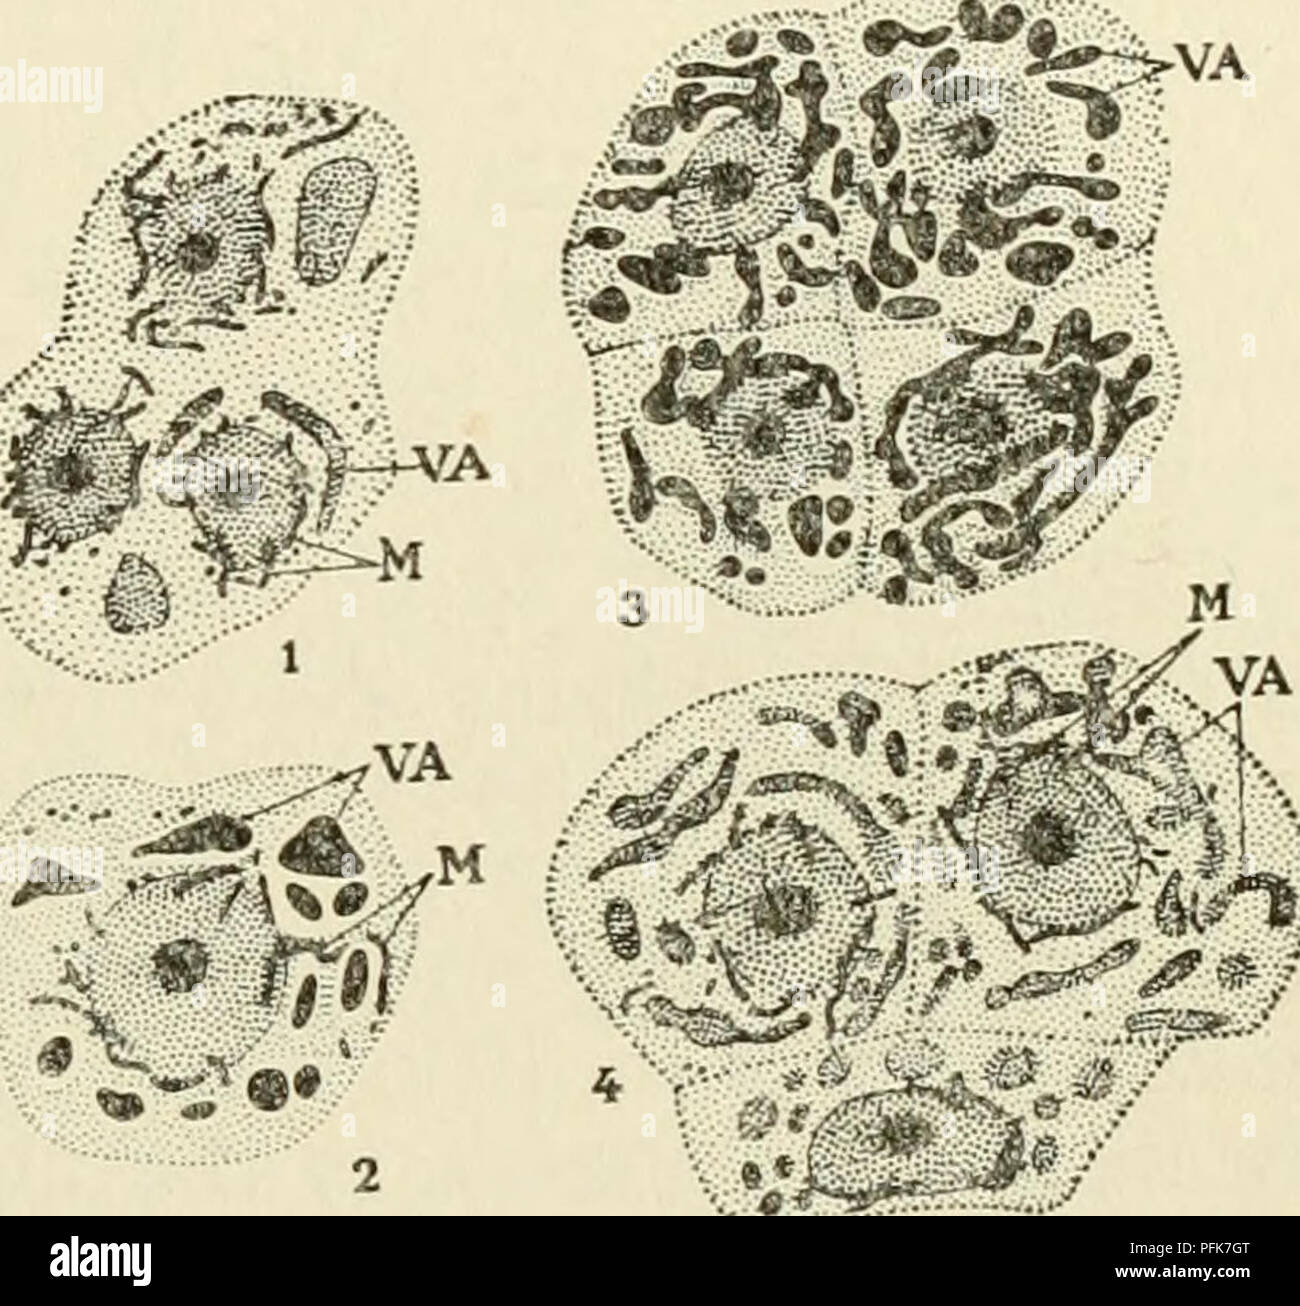 . The cytoplasm of the plant cell. Plant cells and tissues; Protoplasm. Chapter XIV 147 — The Vacuolar System pigment in solution. By reason of the great resemblance between the initial shapes in which anthoeyanin first appears and the shapes of the chondrioconts, we were led to think, originally, that this pigment arose in the elements of the chondriome which then be- came transformed into vacuoles. This interpretation was founded also on the fact that these shapes were preserved by mitochondrial techniques. With the method of Regaud, for example, we ob- tained at that time, both typical chon Stock Photo